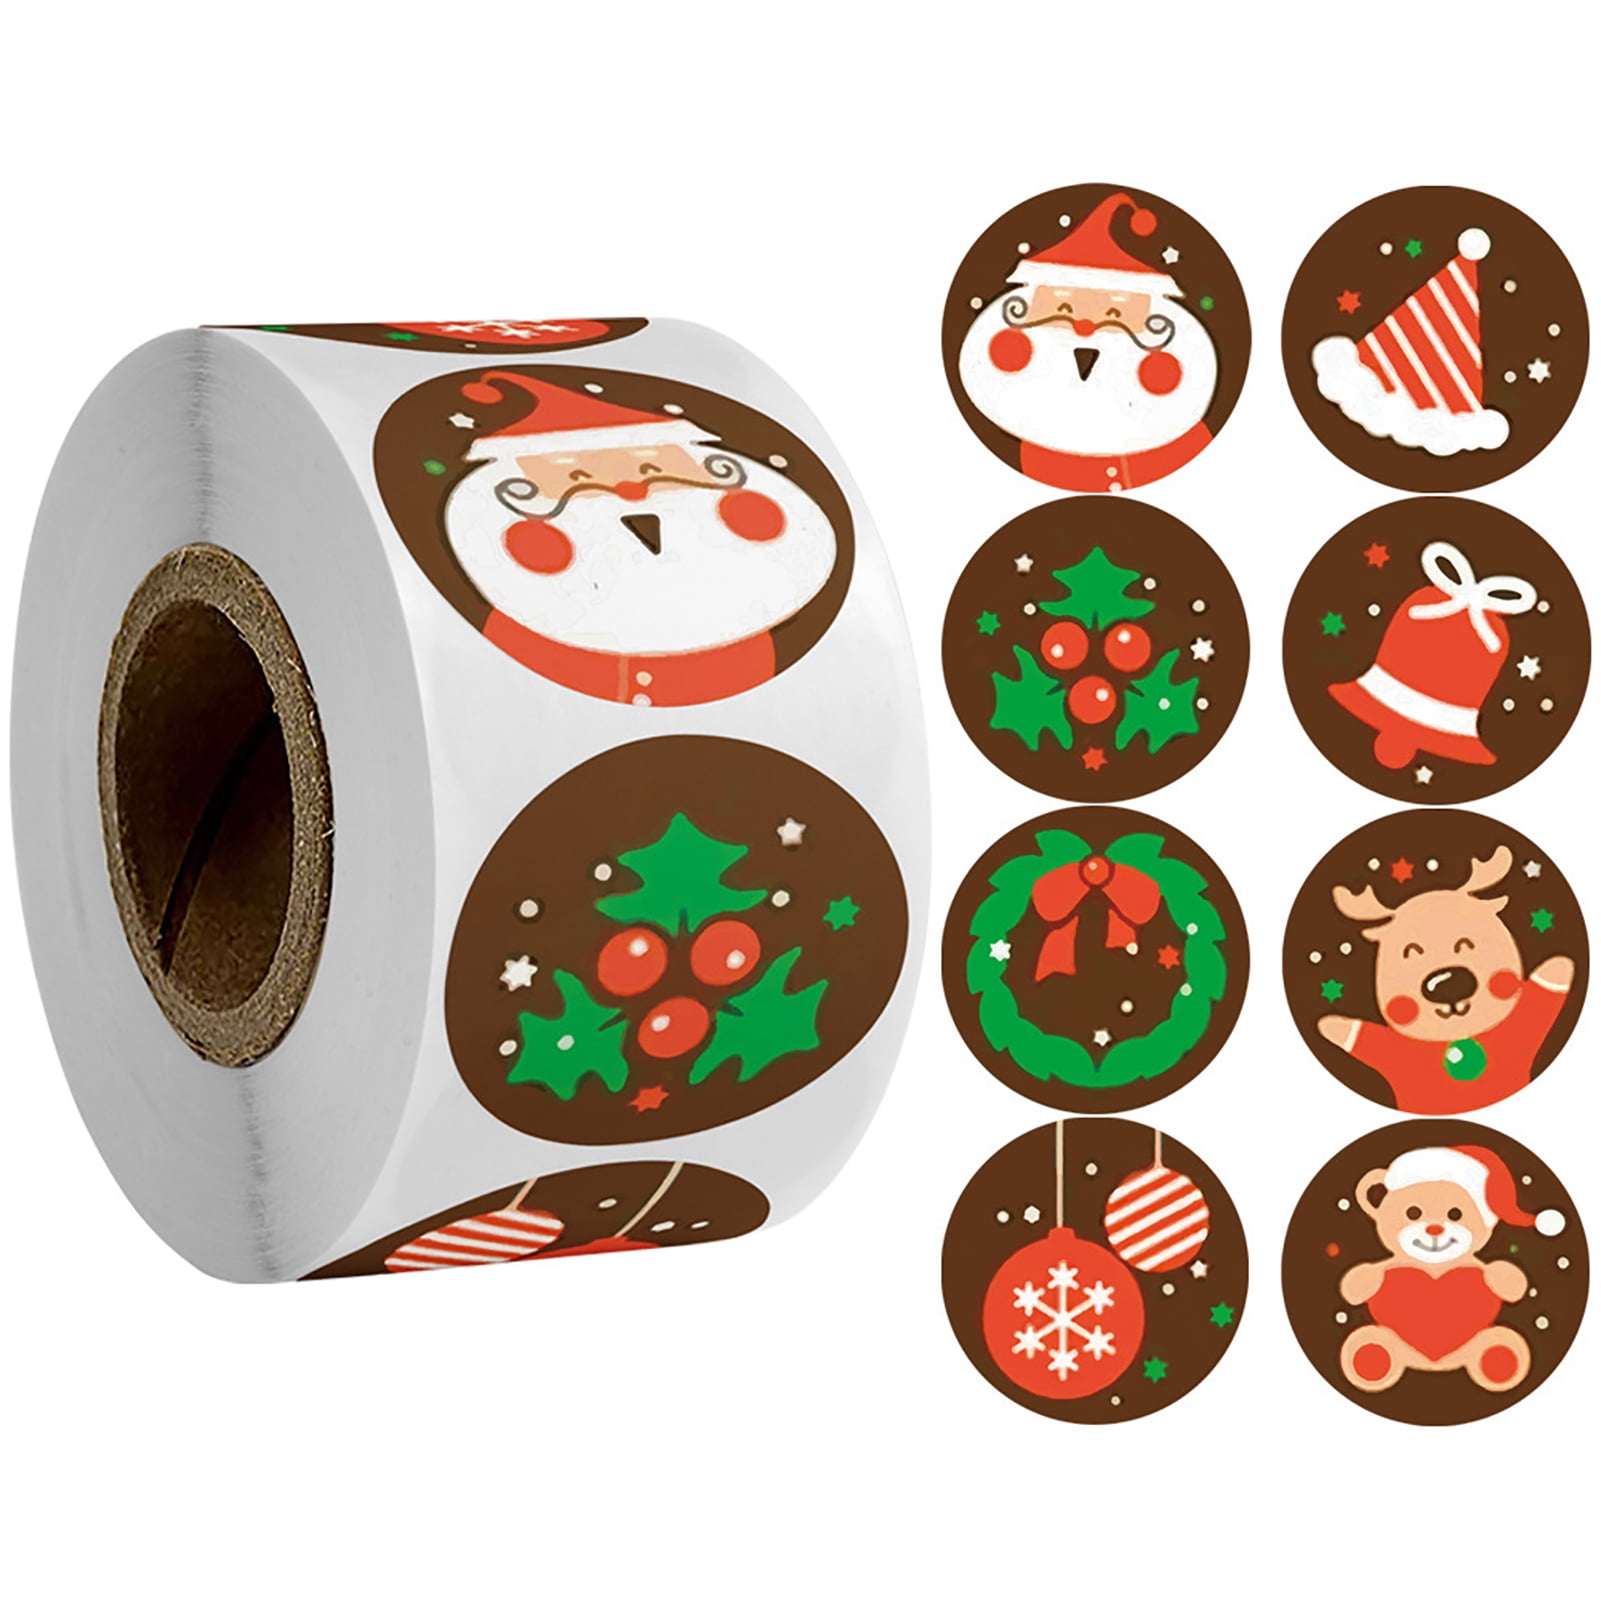 48 MERRY CHRISTMAS TREE ENVELOPE SEALS LABELS STICKERS 1.2" ROUND 